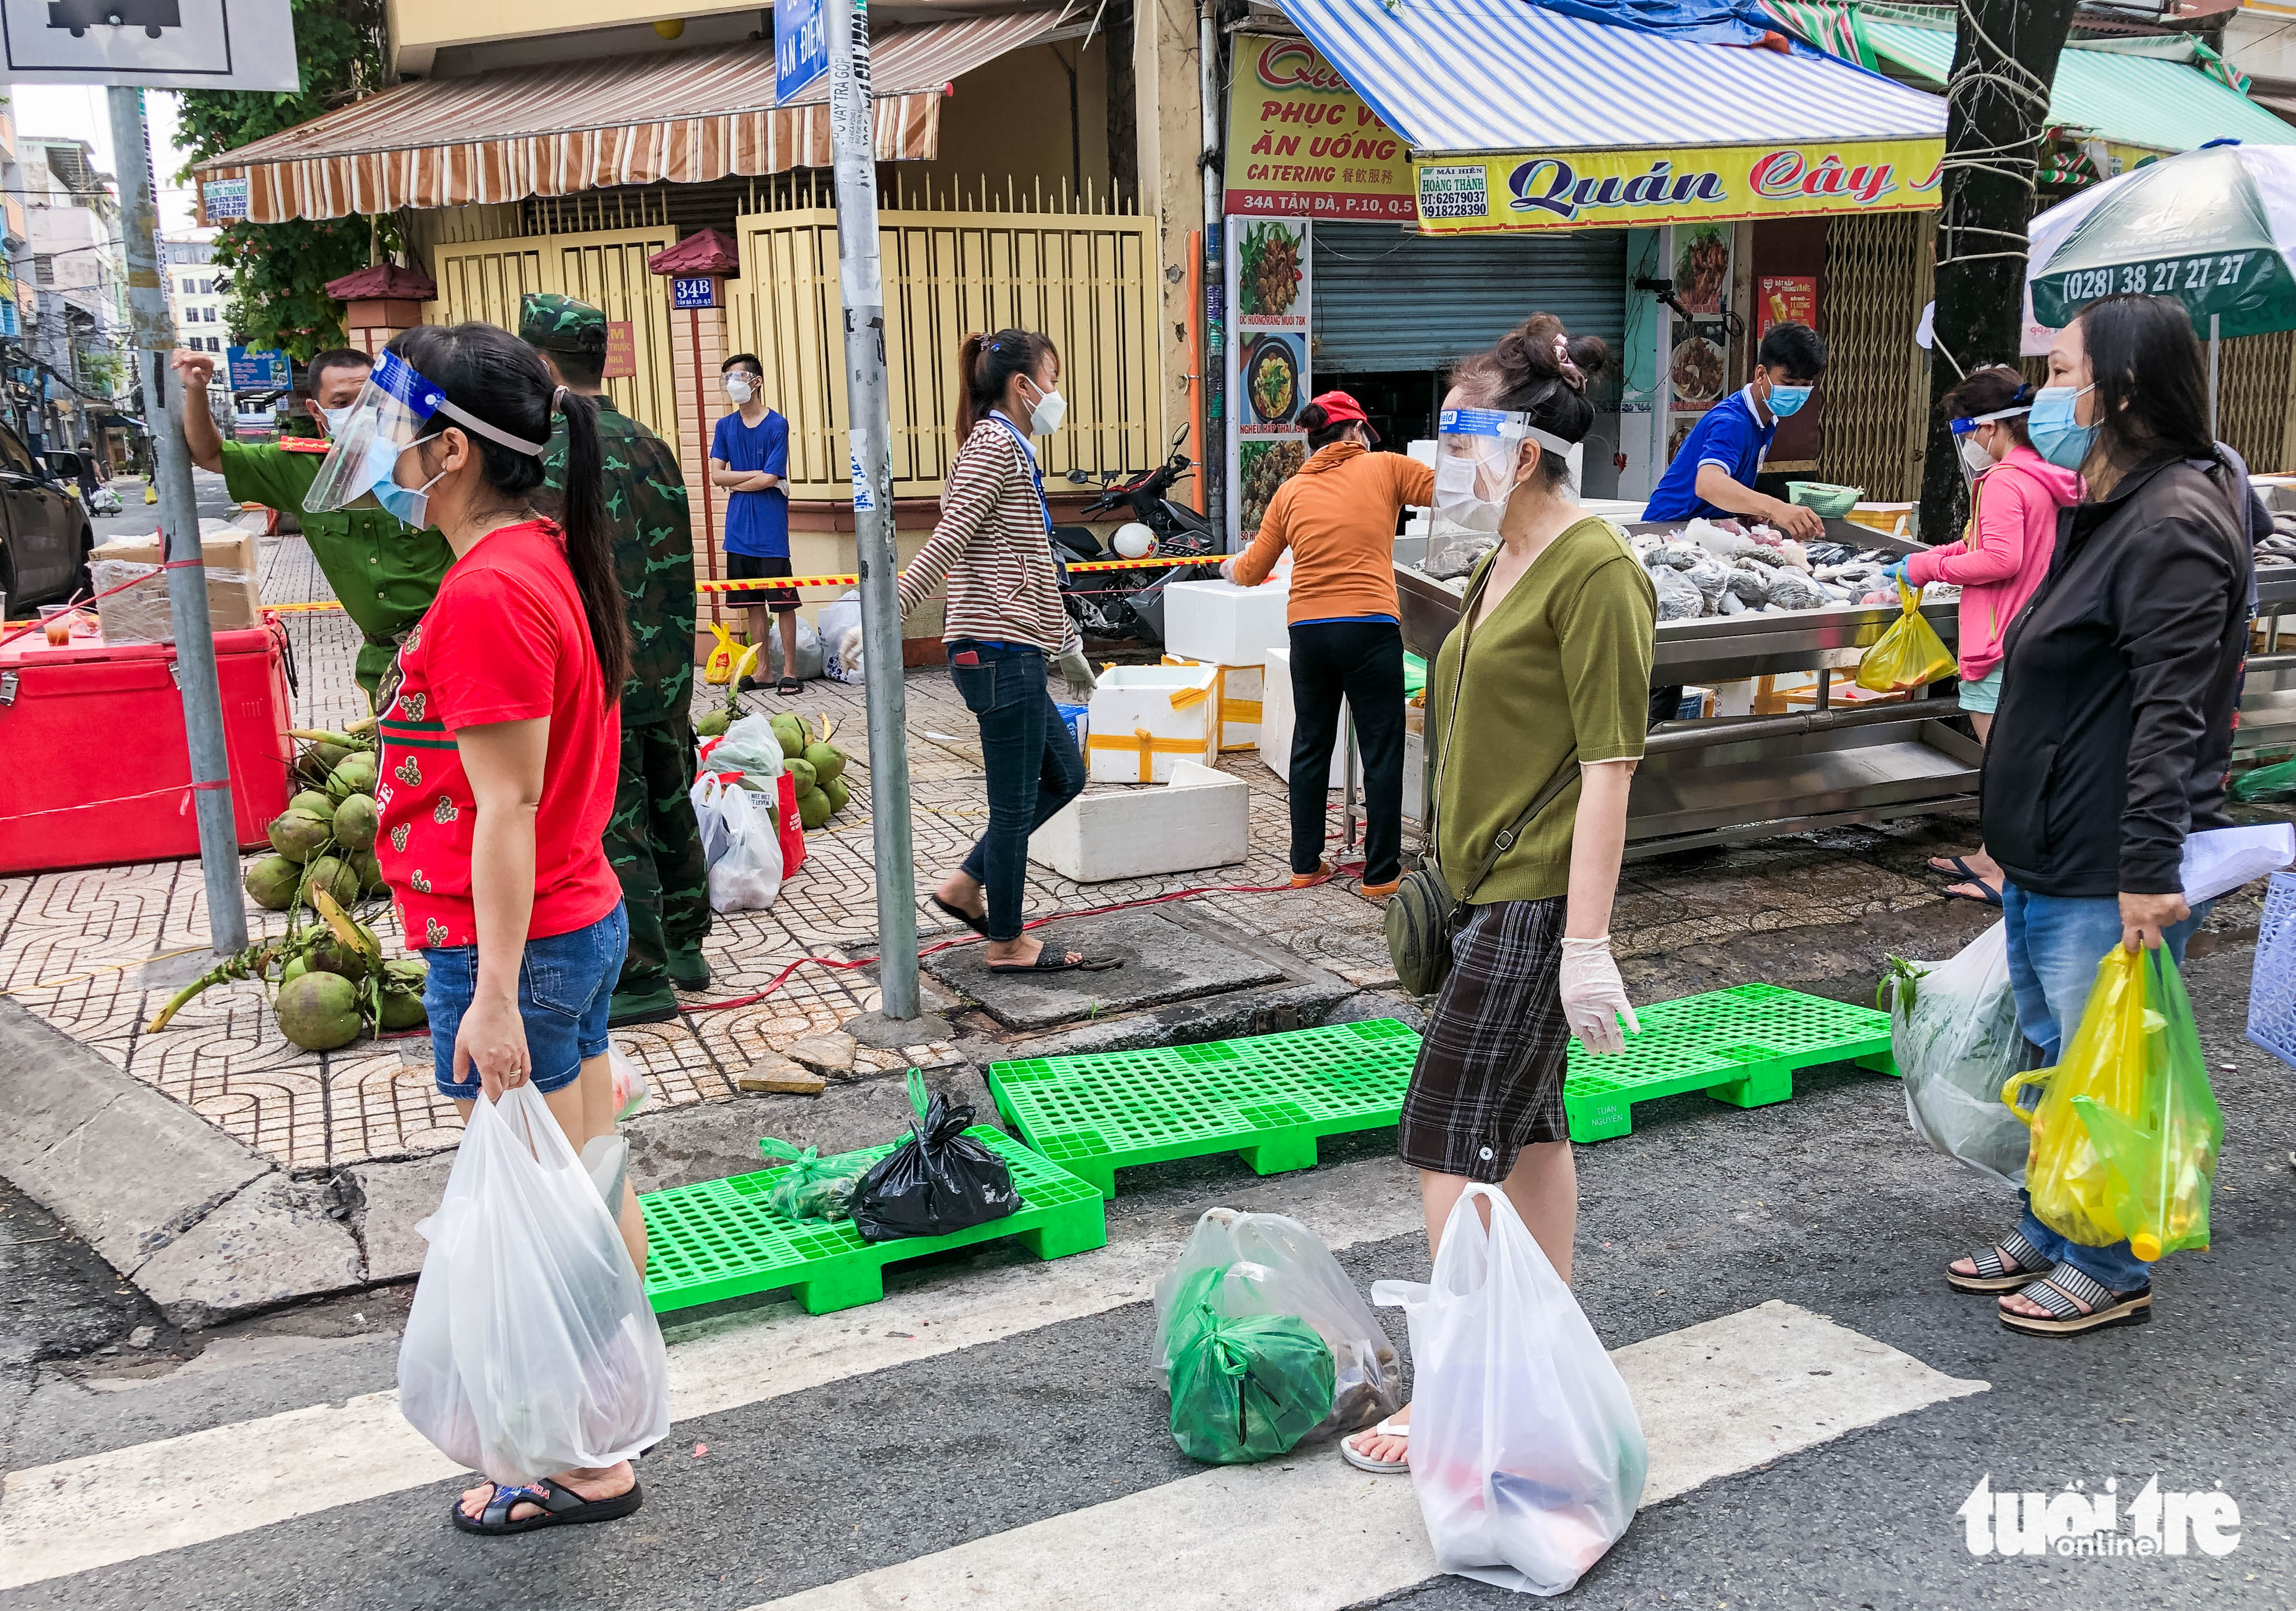 Residents are required to socially distance while shopping at the market. Photo: Chau Tuan / Tuoi Tre